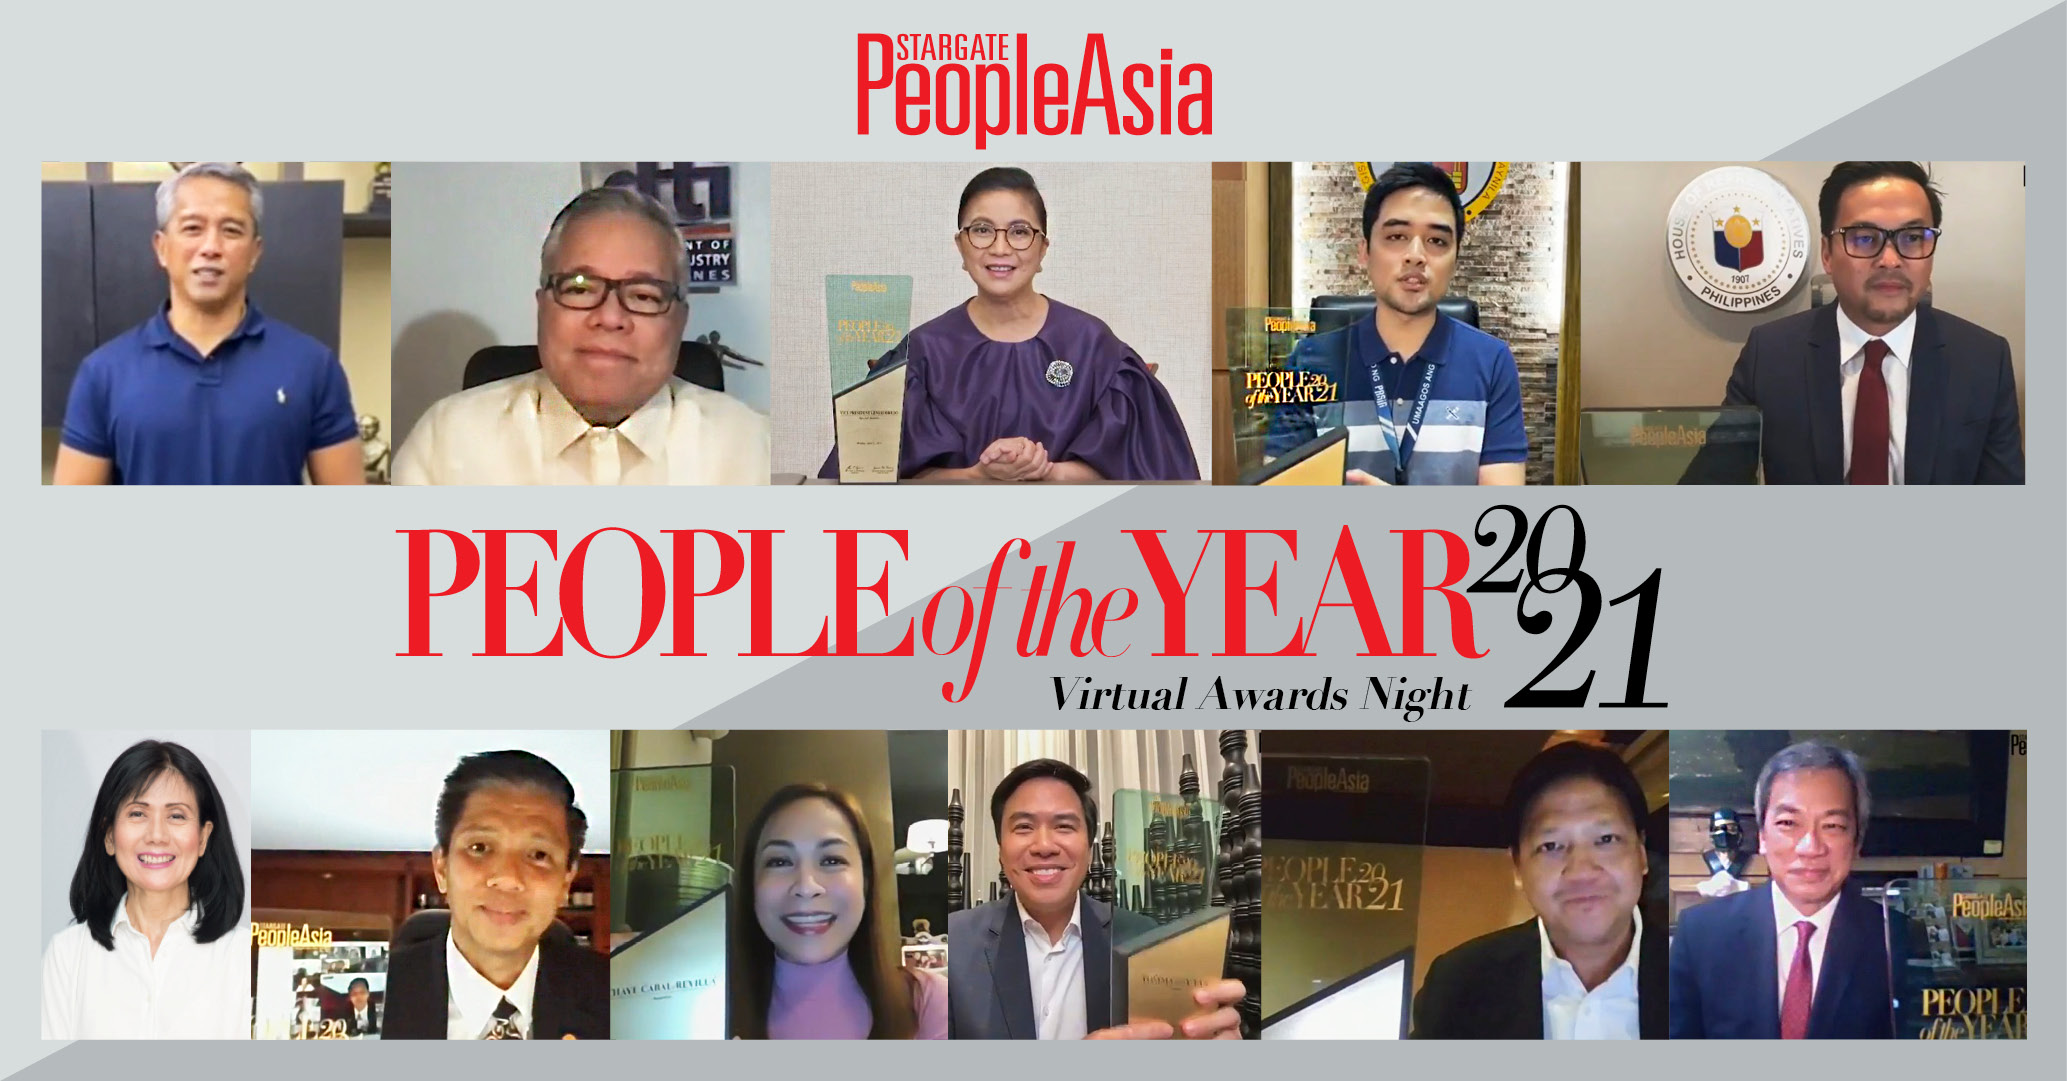 Hope & heroism:  Frontliners take center stage at the People of the Year awards night